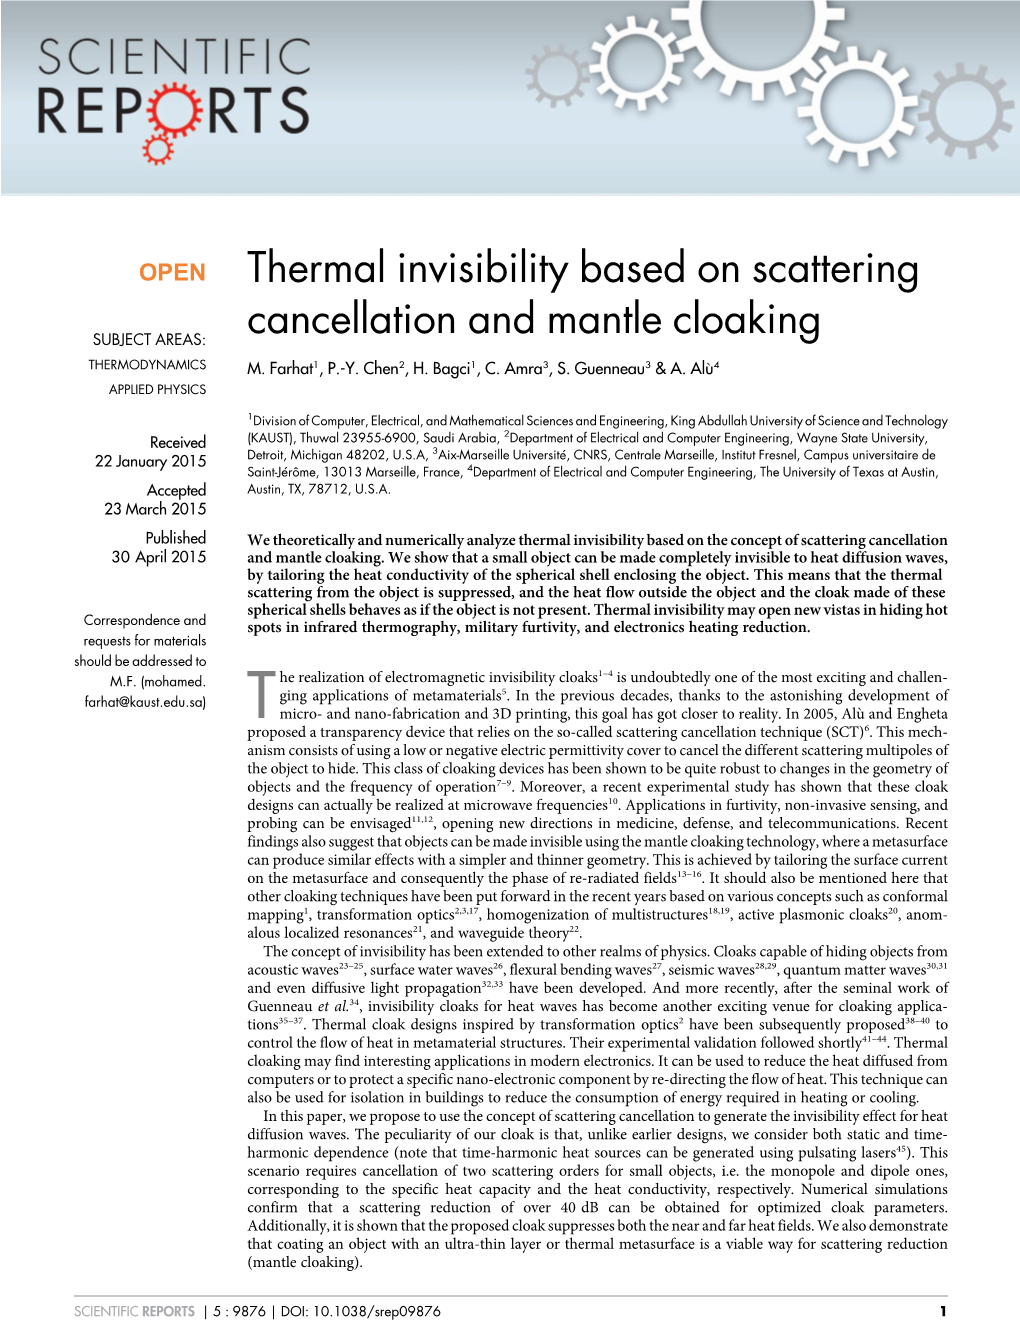 Thermal Invisibility Based on Scattering Cancellation and Mantle Cloaking M